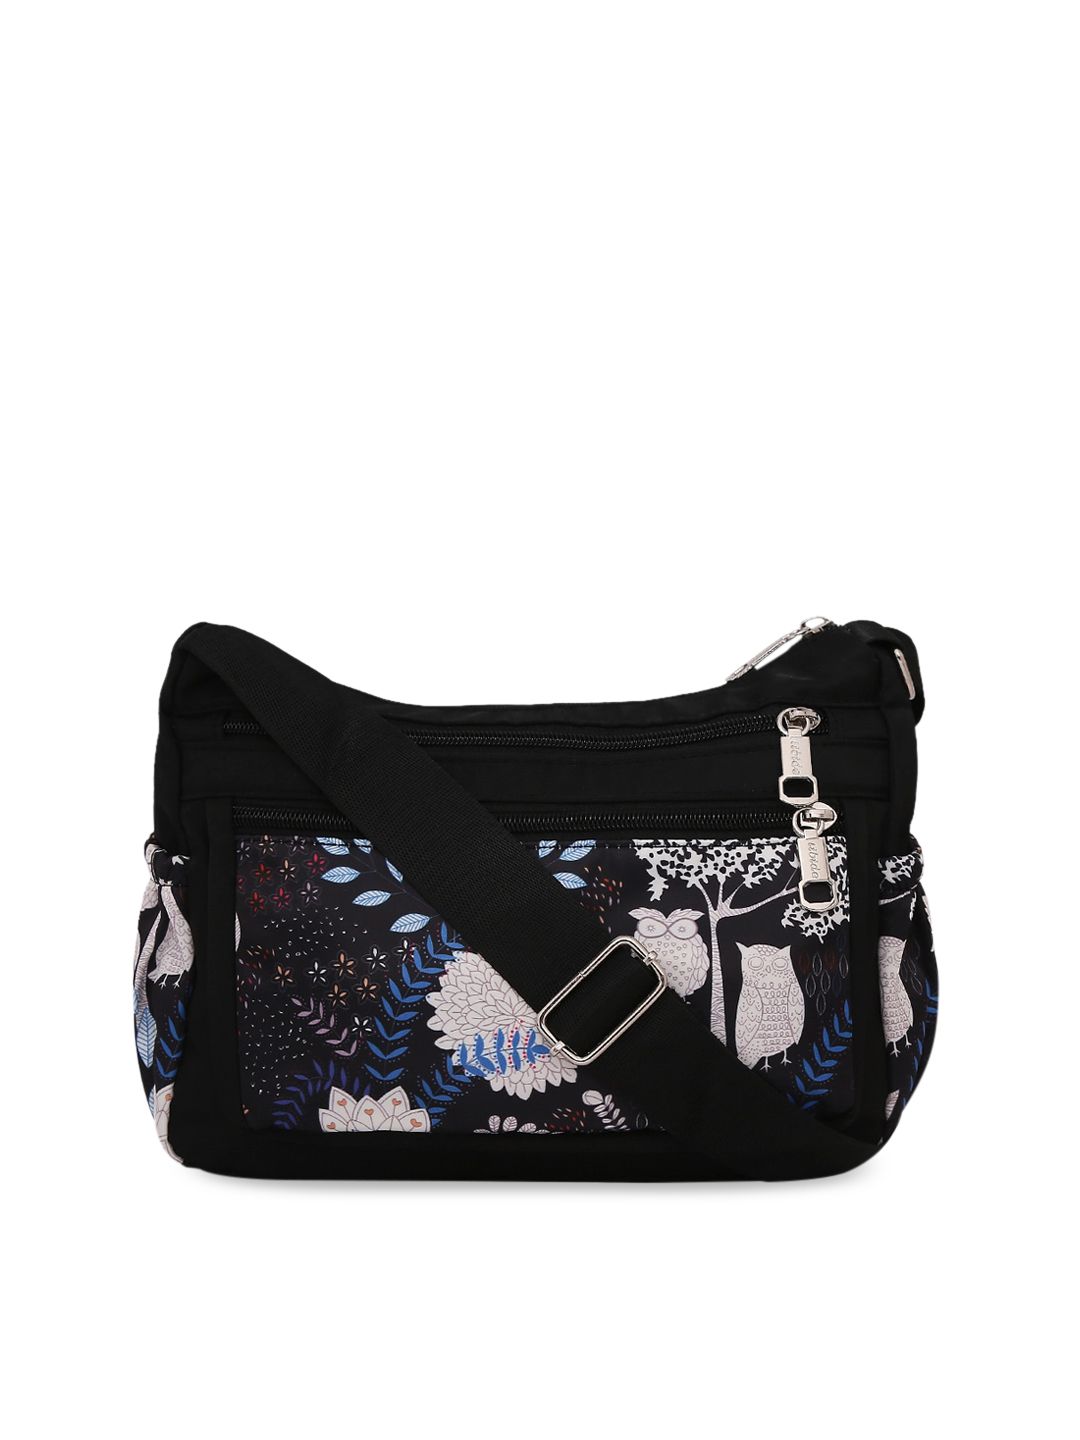 SATCHEL Multicoloured Floral Printed Structured Sling Bag Price in India